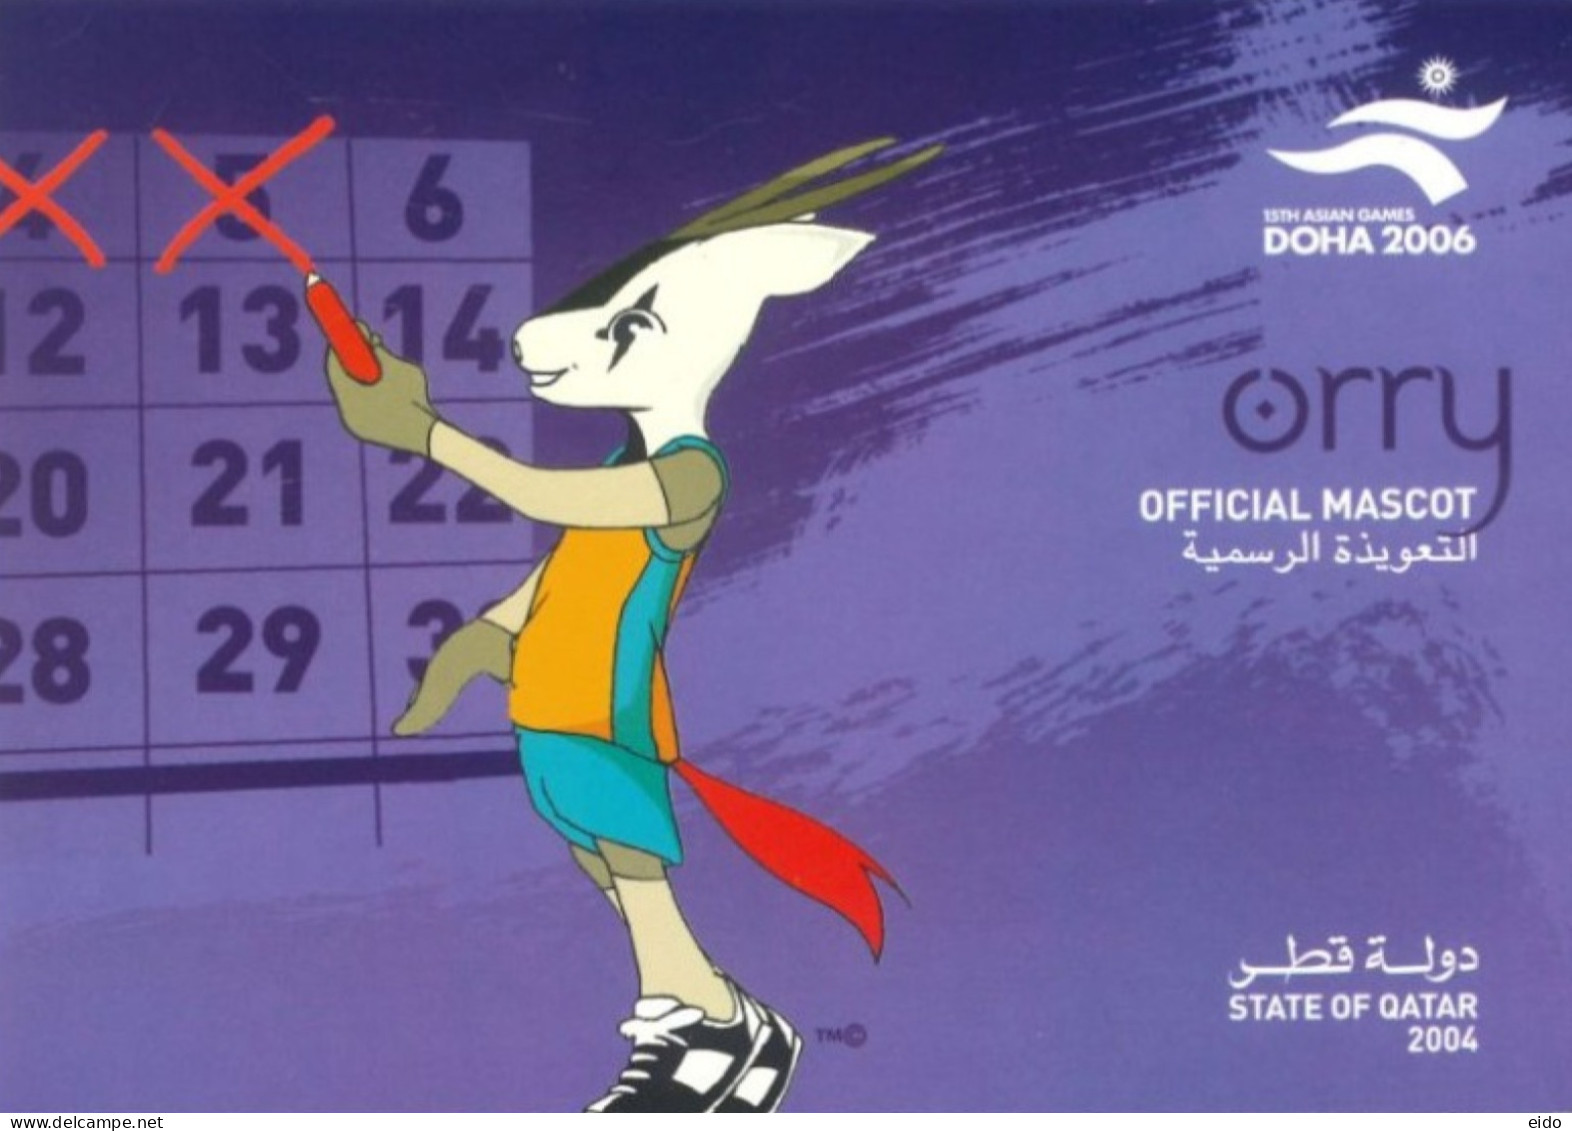 QATAR.  - 2004 - ORRY OFFICIAL MASCOT POSTCARD OF 15th ASIAN GAMES, DOHA 2006, MINT NOT USED. - Qatar